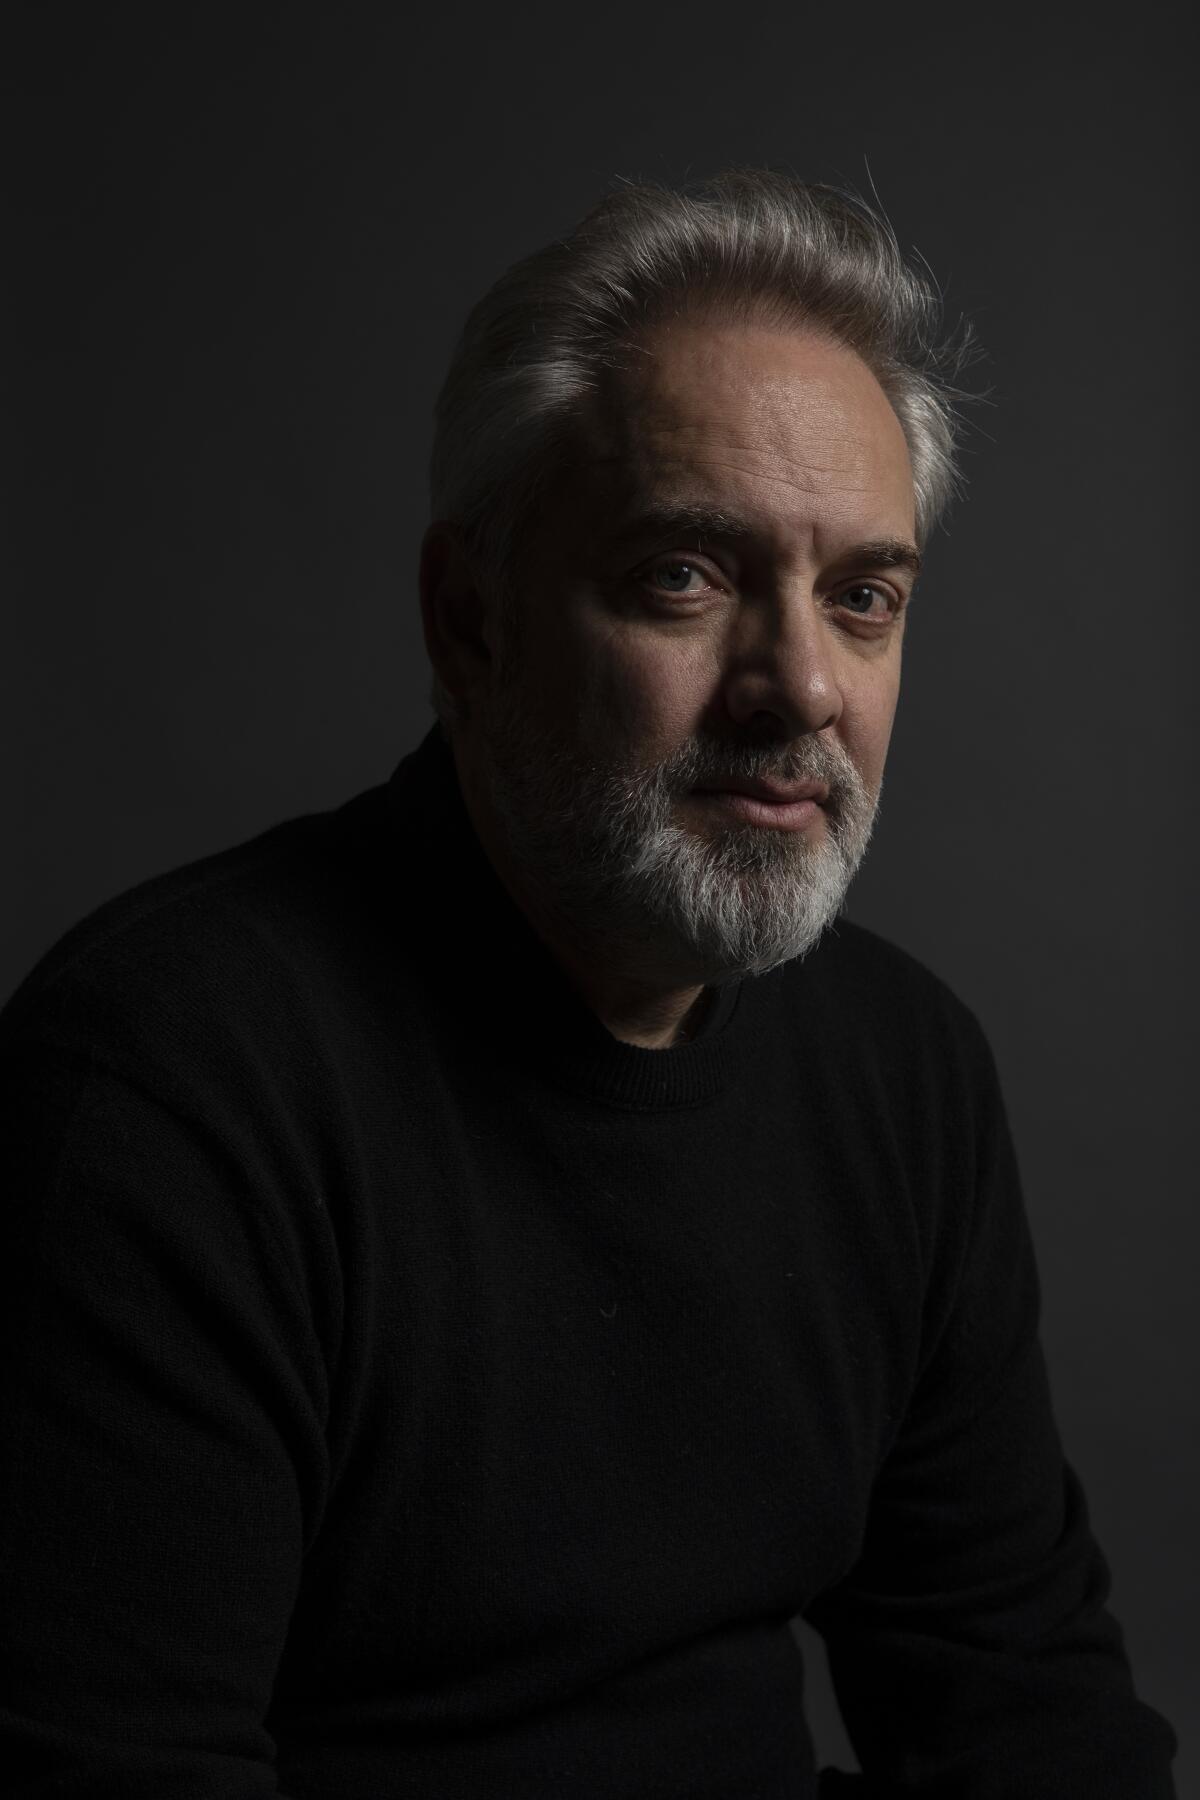 Sam Mendes is nominated in the director category for his film "1917."